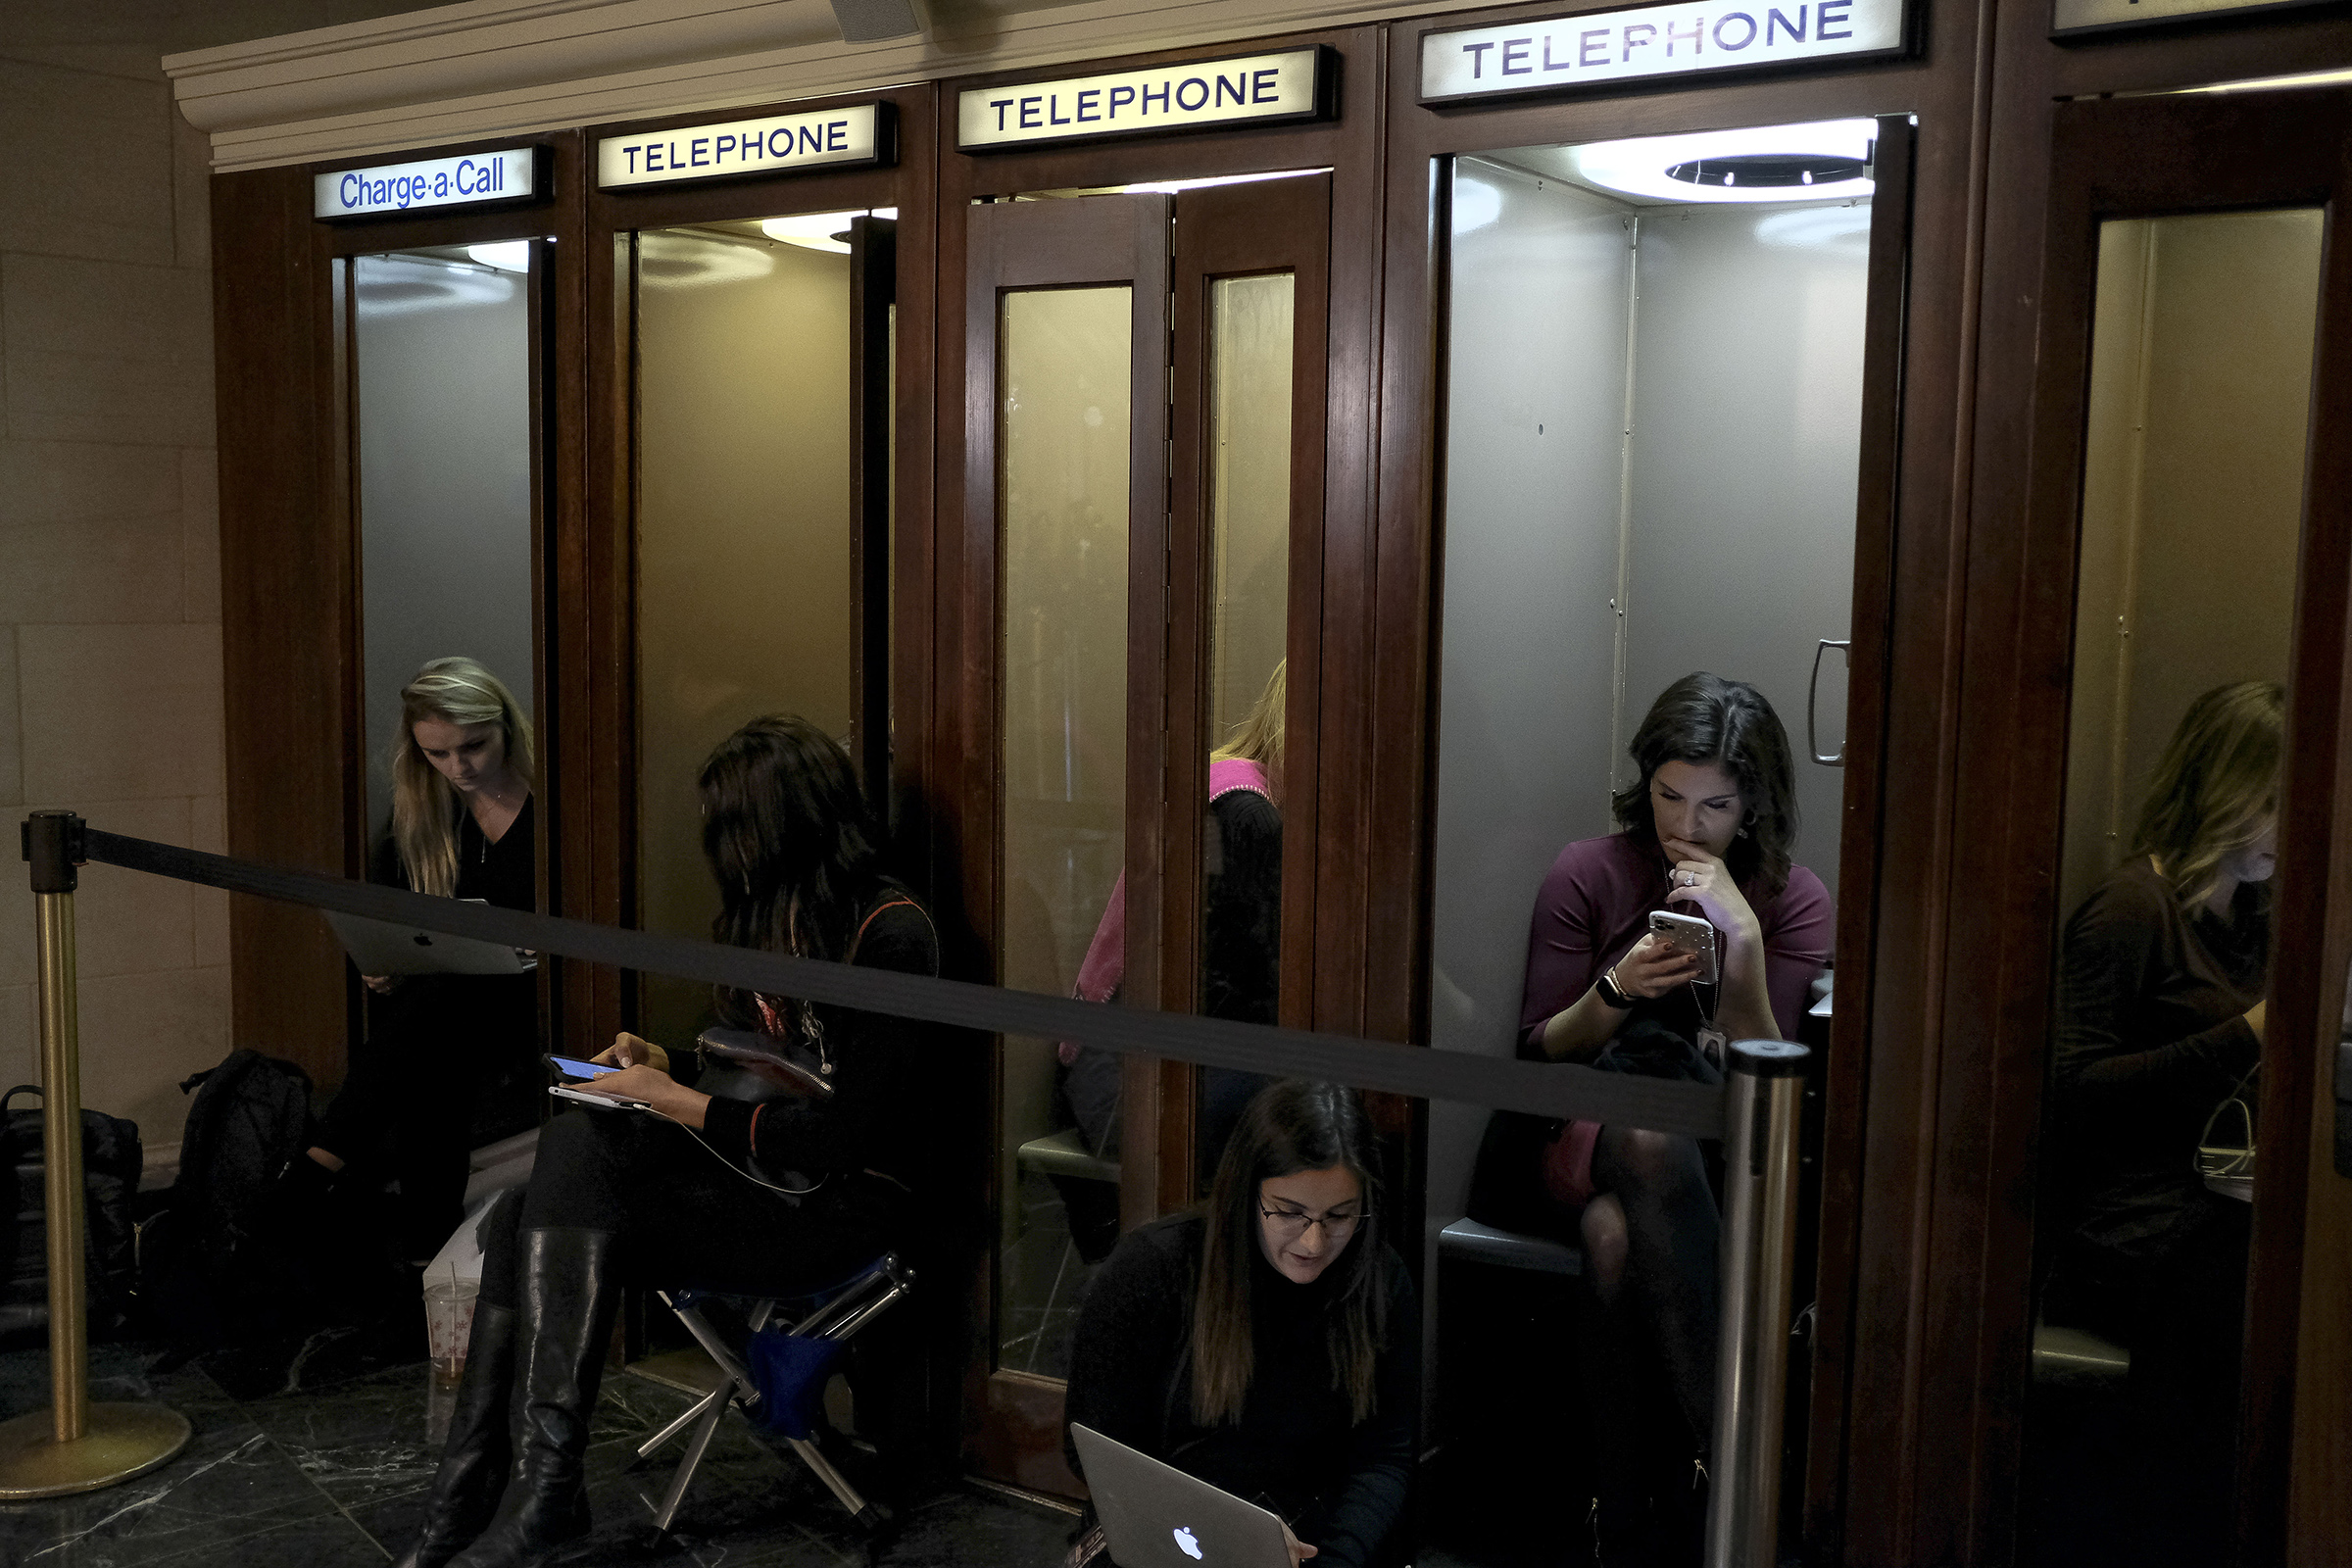 Members of the press sit in phone booths outside the House Intelligence Committee room during the hearing on the impeachment inquiry on Capitol Hill in Washington, D.C. on Nov. 19, 2019. (Gabriella Demczuk for TIME)